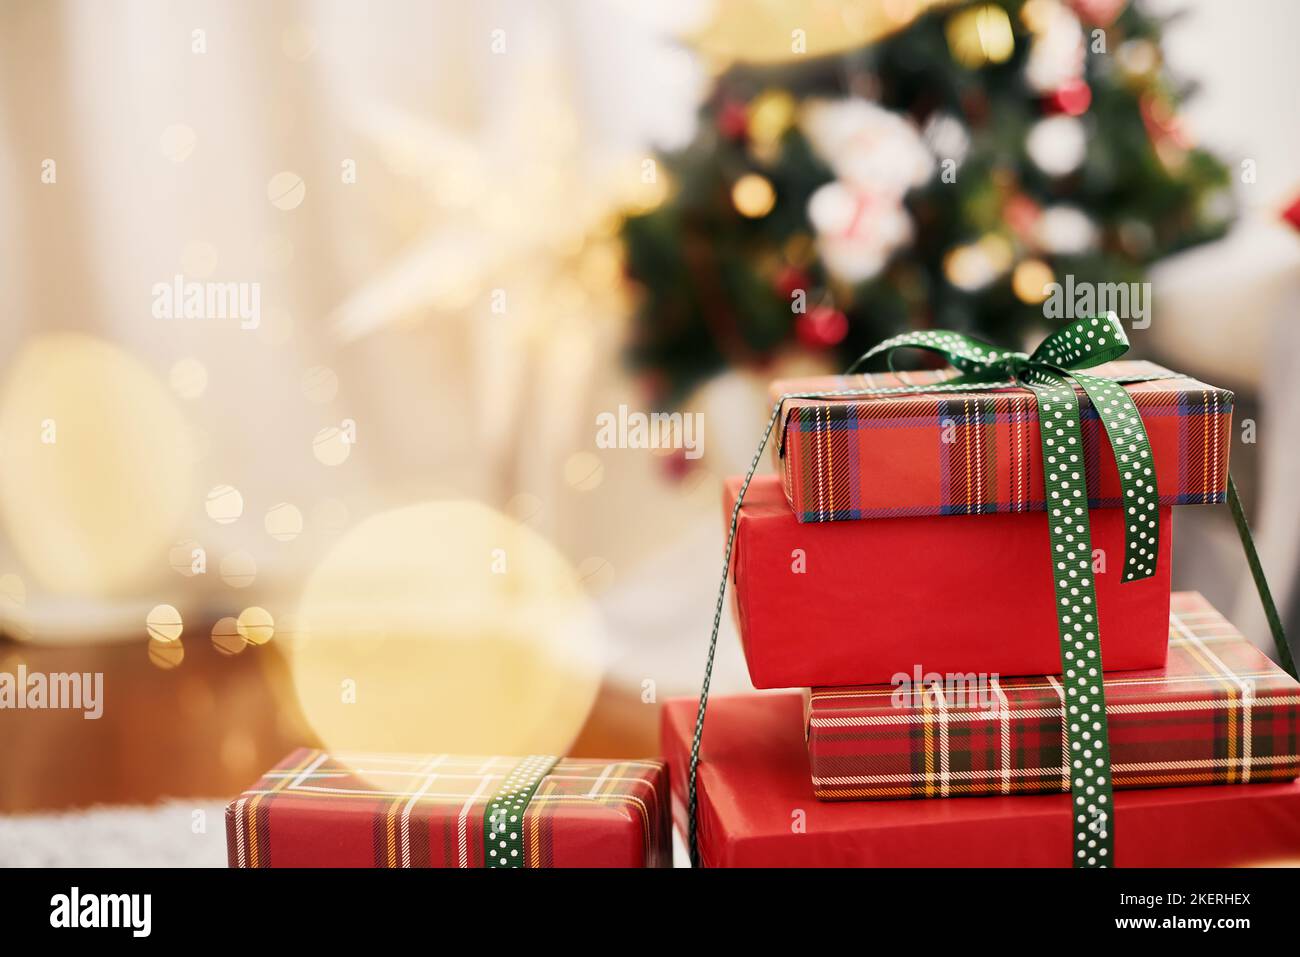 Christmas wrapped boxes gifts presents with ribbons Merry Christmas Happy New Year Holiday Spirit Stock Photo